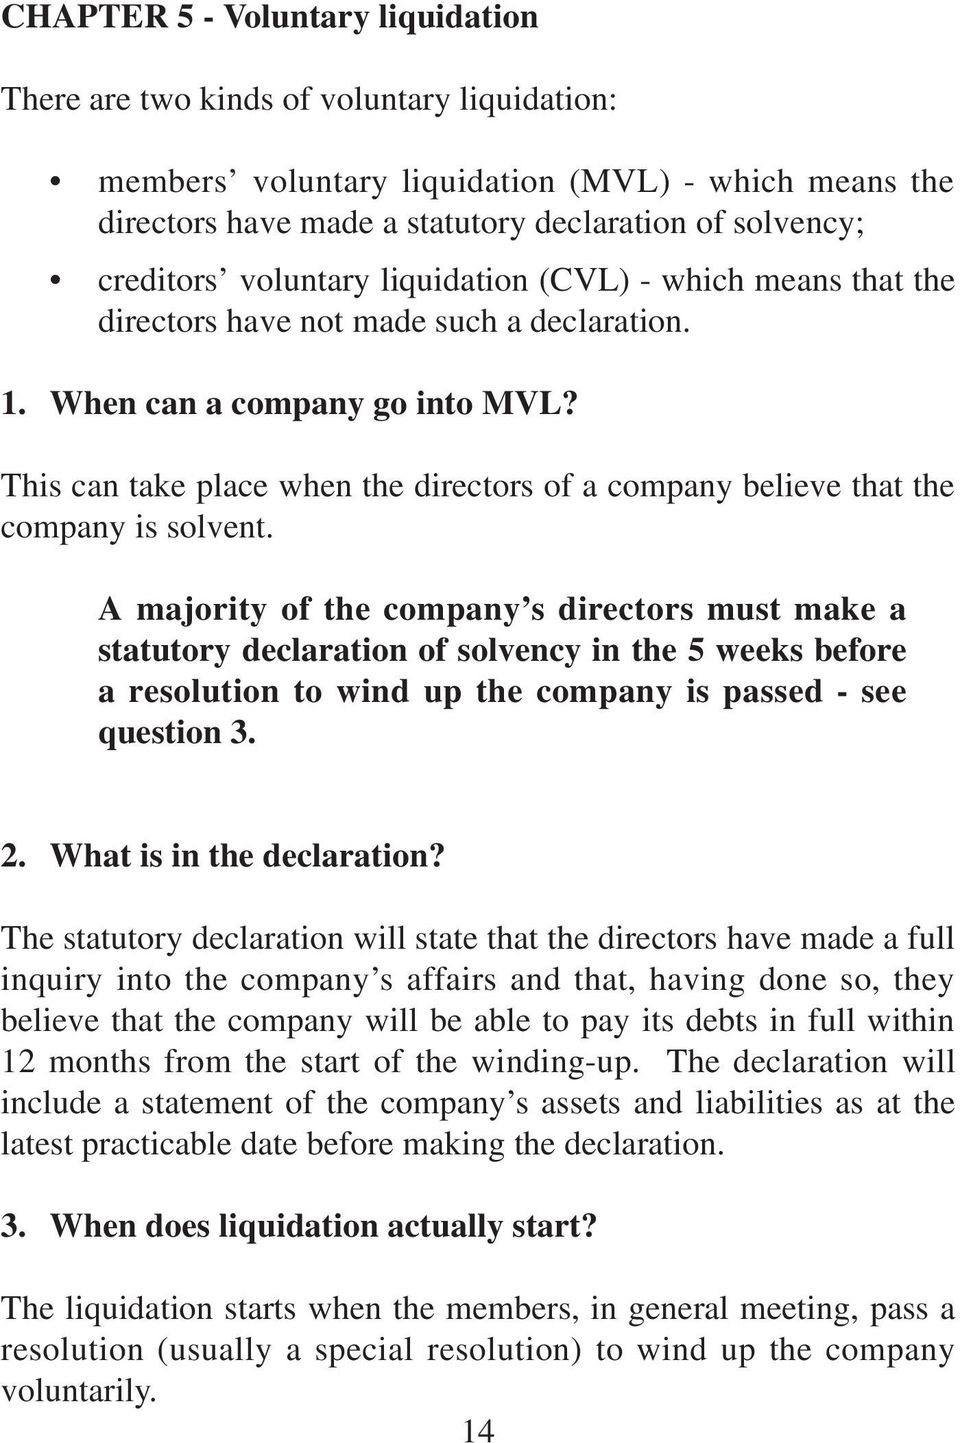 This can take place when the directors of a company believe that the company is solvent.